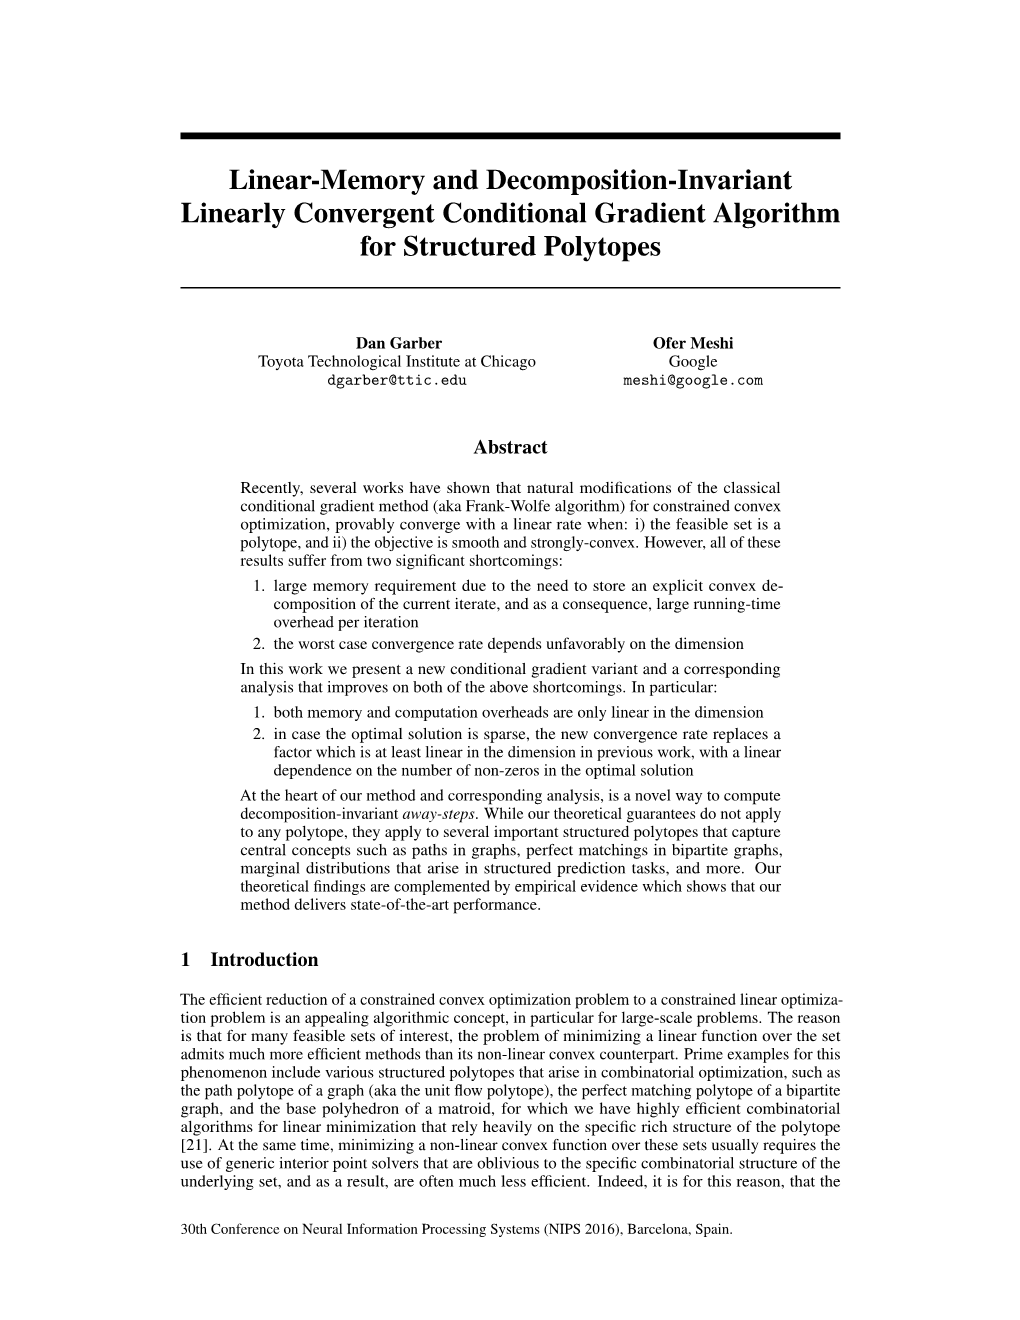 Linear-Memory and Decomposition-Invariant Linearly Convergent Conditional Gradient Algorithm for Structured Polytopes